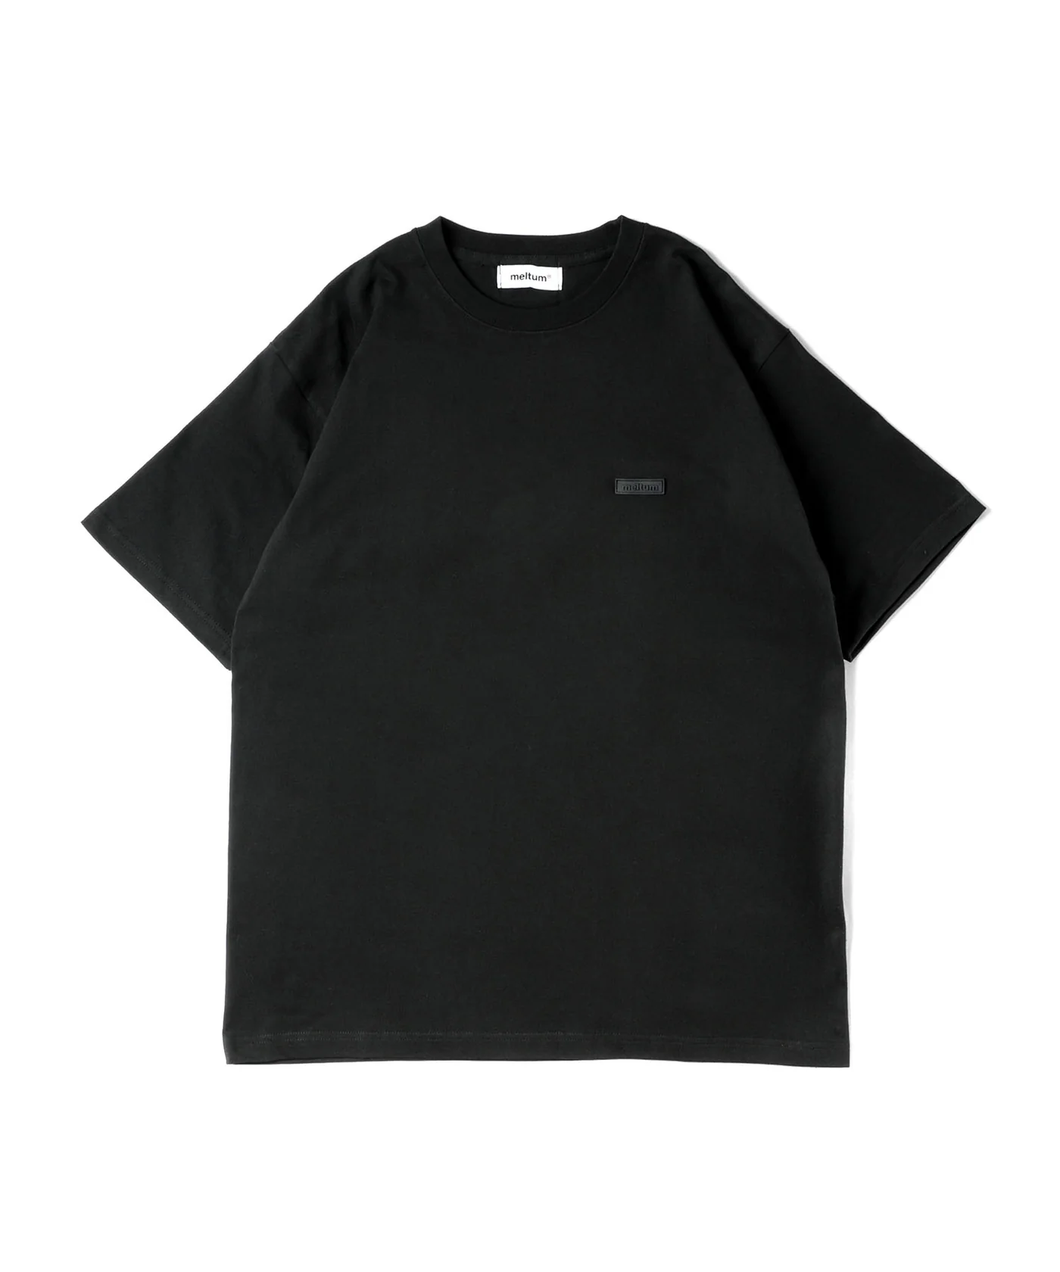 24SS Meltum / RUBBER TAG TEE S/S